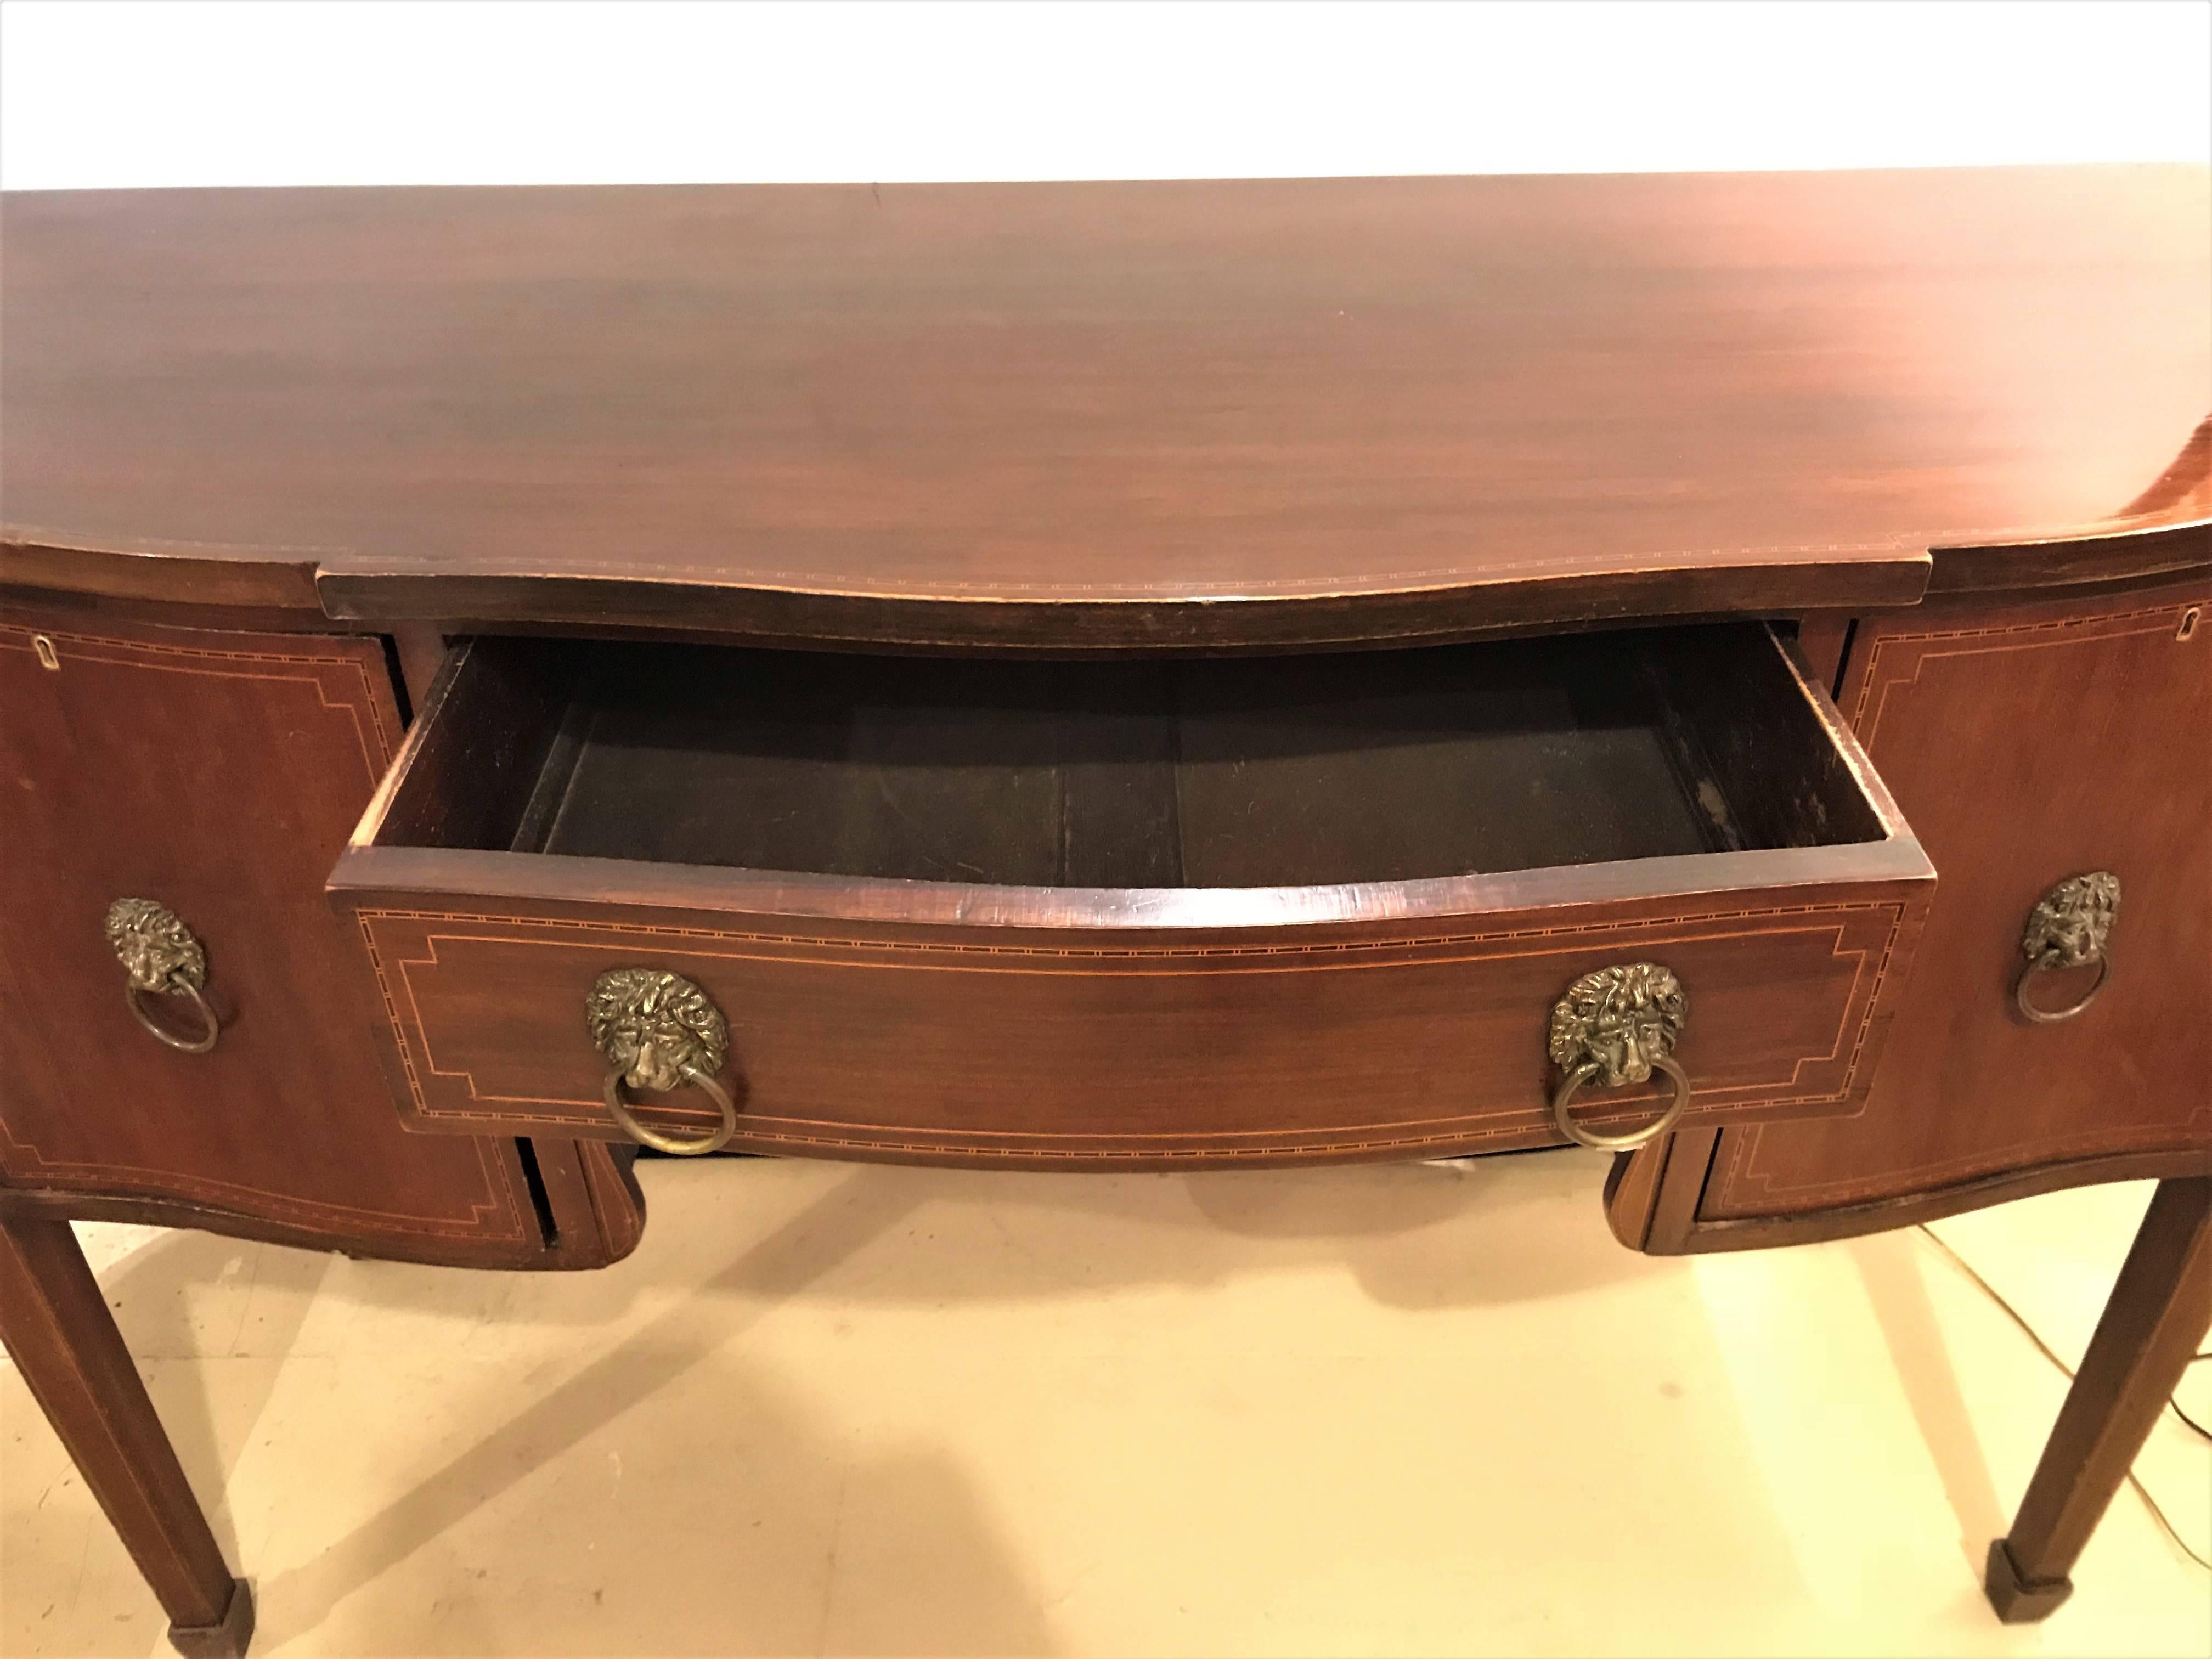 19th Century Georgian Style Sideboard or Server with Inlays 1